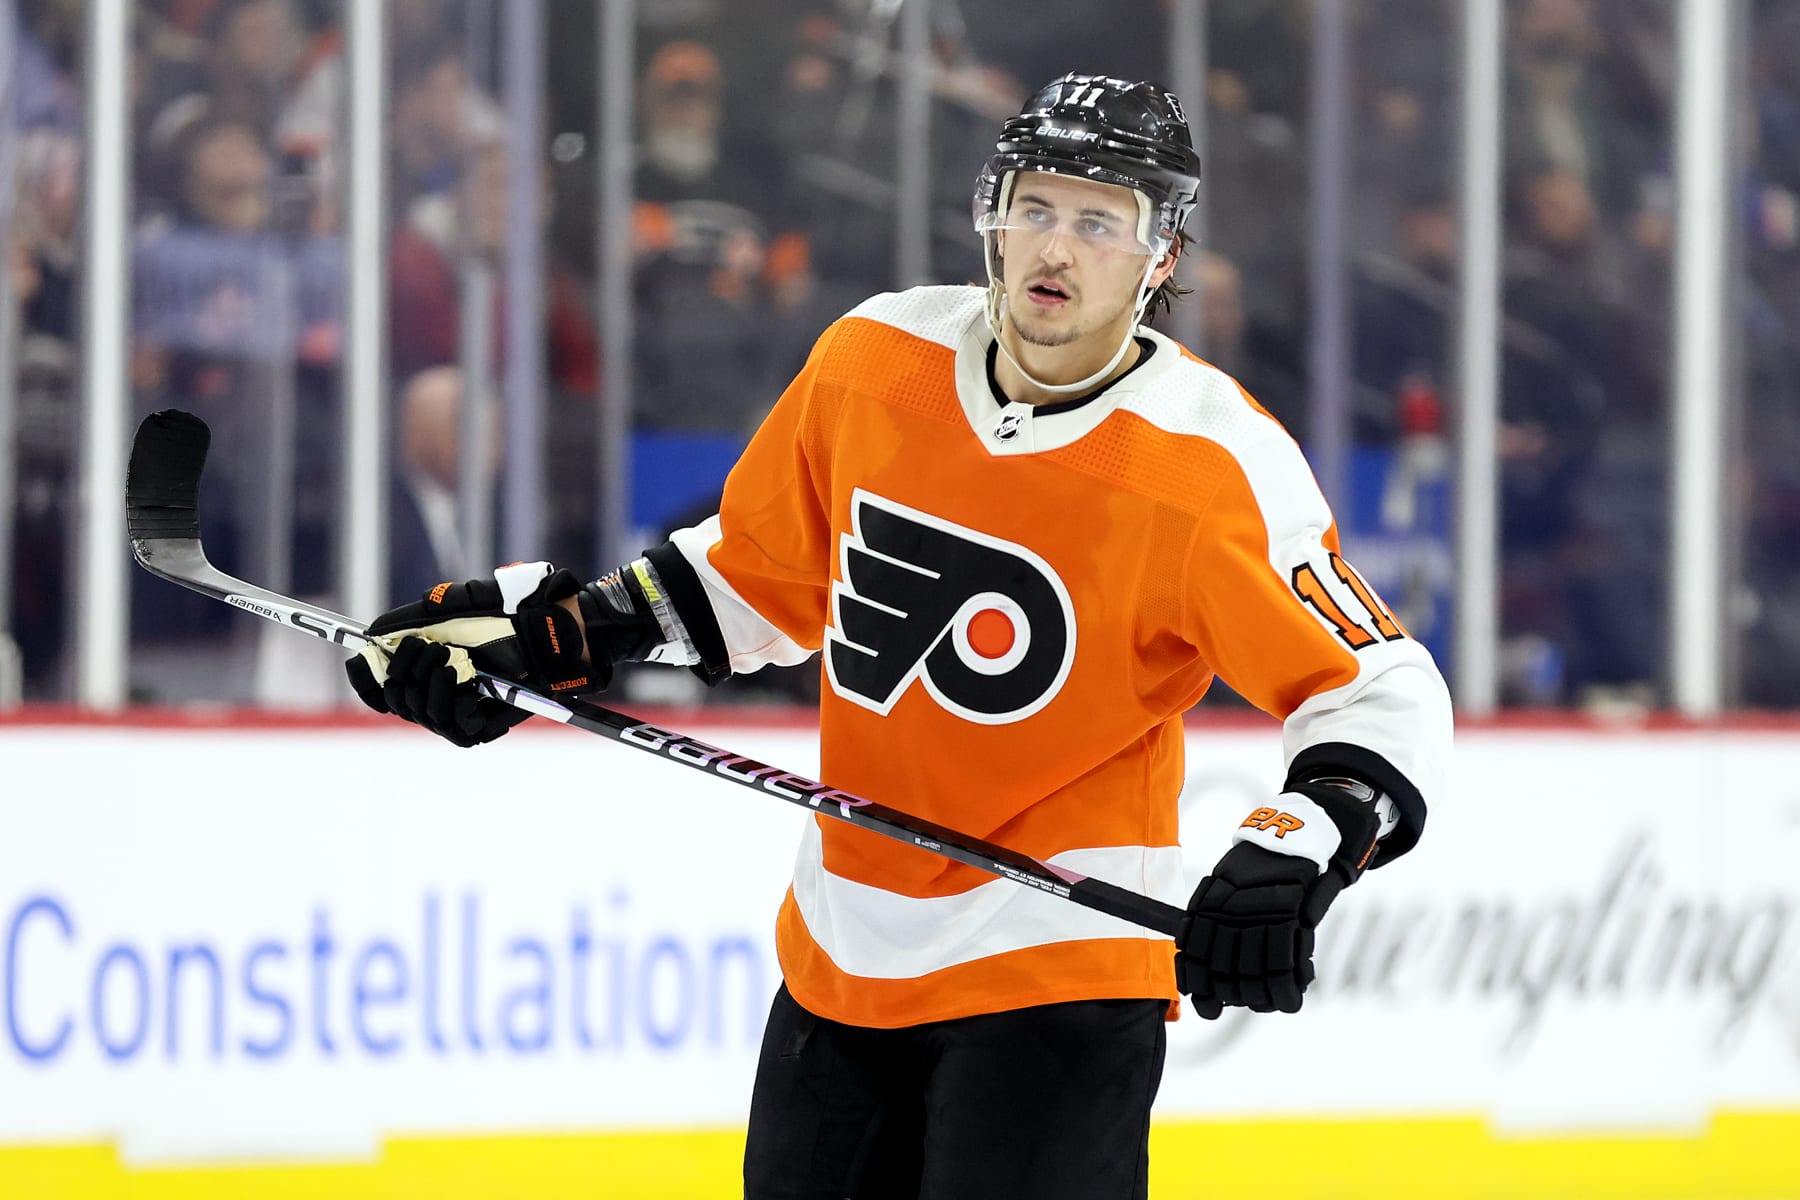 While coming into his own, Konecny boosting Flyers beyond where they've been